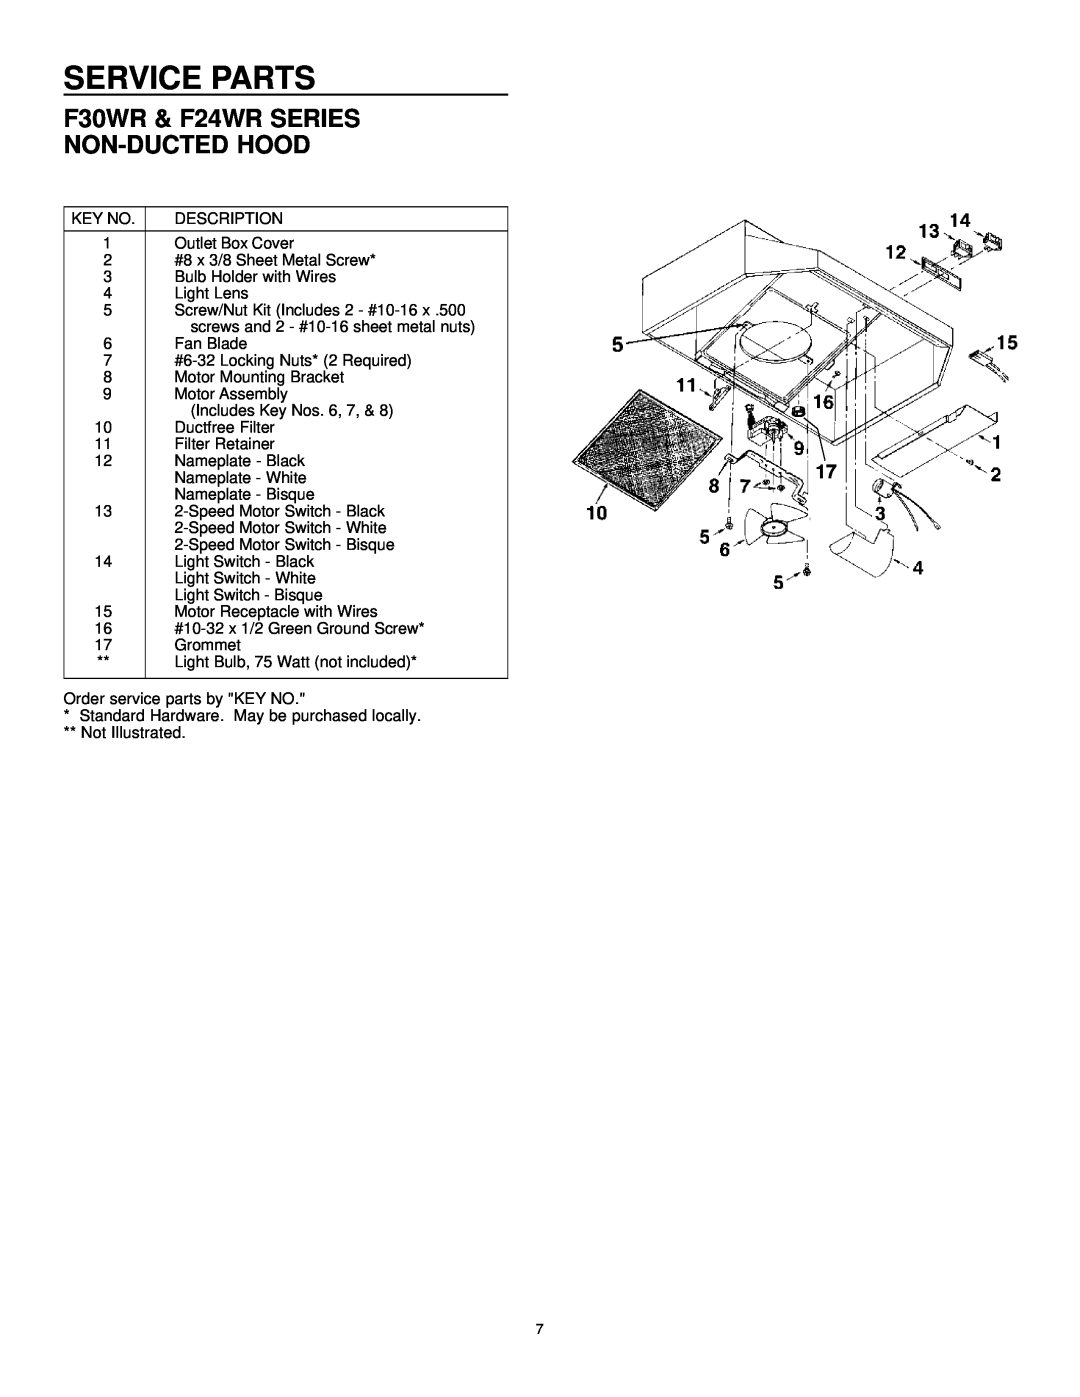 Frigidaire F30WV installation instructions F30WR & F24WR SERIES NON-DUCTED HOOD, Service Parts 